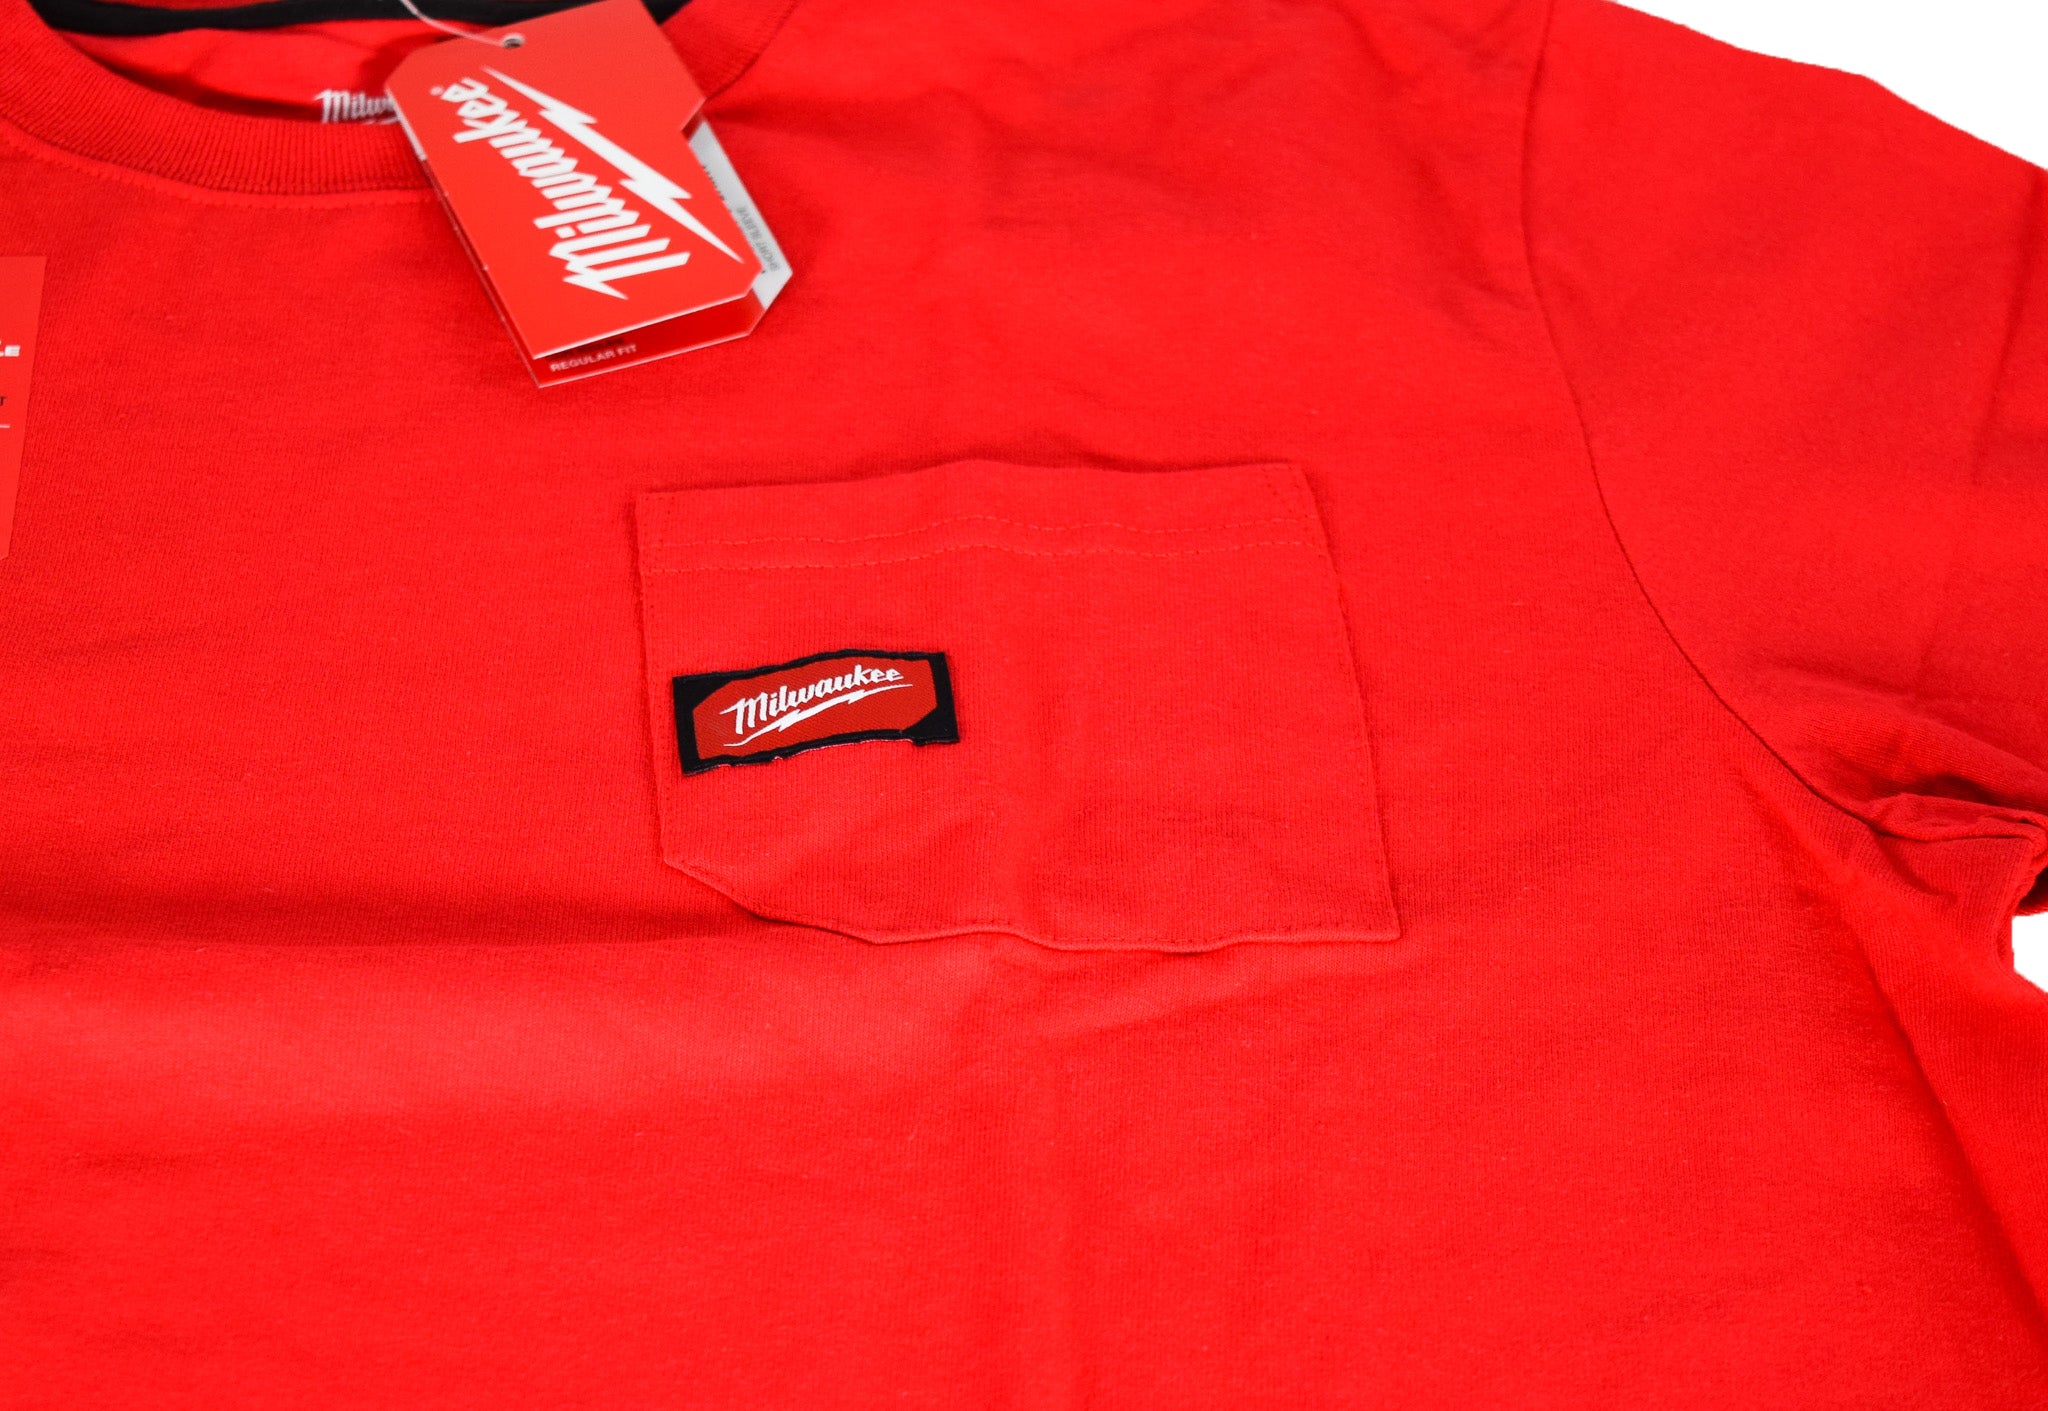 Milwaukee Men's Large Red Heavy Duty Cotton/Polyester Short-Sleeve Pocket T-Shirt (601R-L) (CLONE)